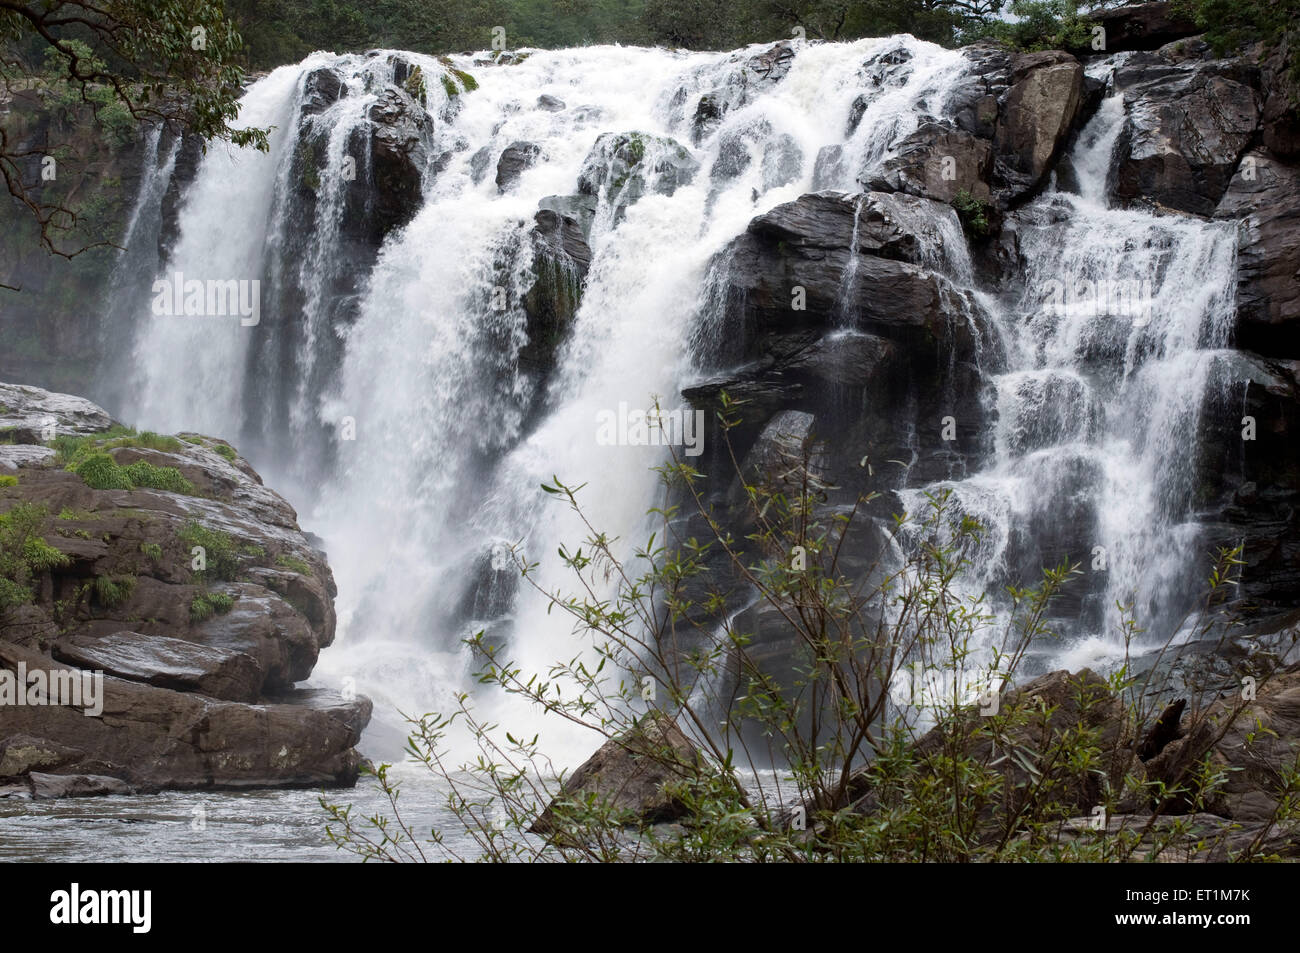 A Thoovanam waterfall over the rocks in tremendous speed Munnar Kerala India Asia Stock Photo